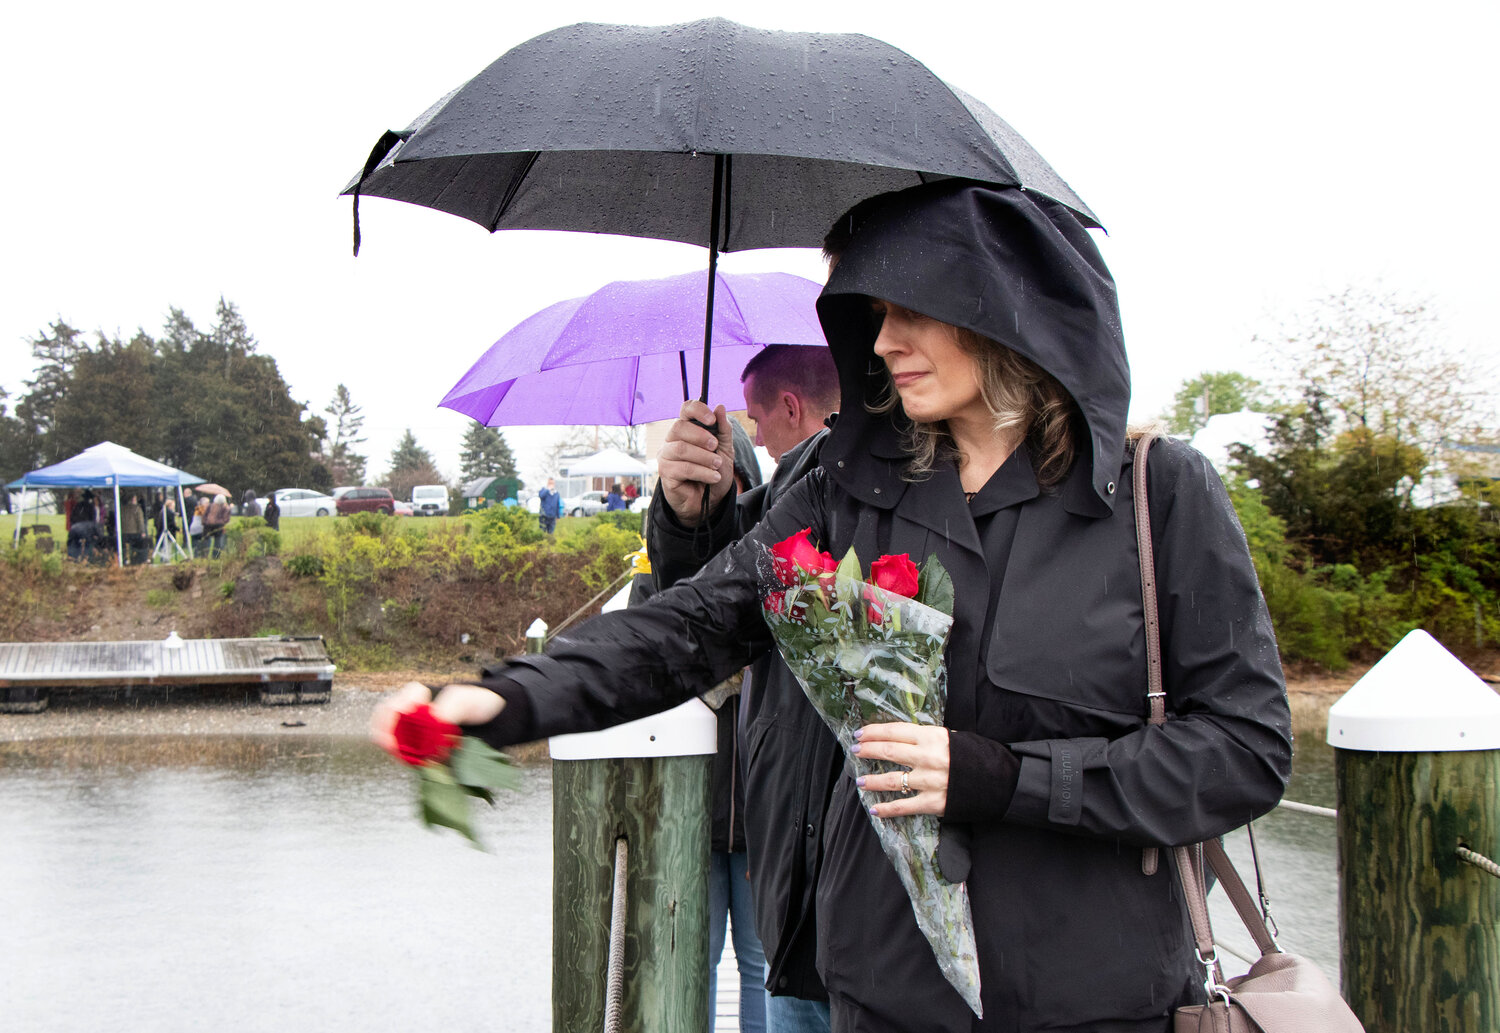 Shannon Watson tosses a rose into Blue Bill Cove Sunday afternoon in memory of her son, Cole, who died at the age of 22 after jumping from the Claiborne Pell Newport Bridge on May 7, 2022. Her husband, Tom, is behind her.